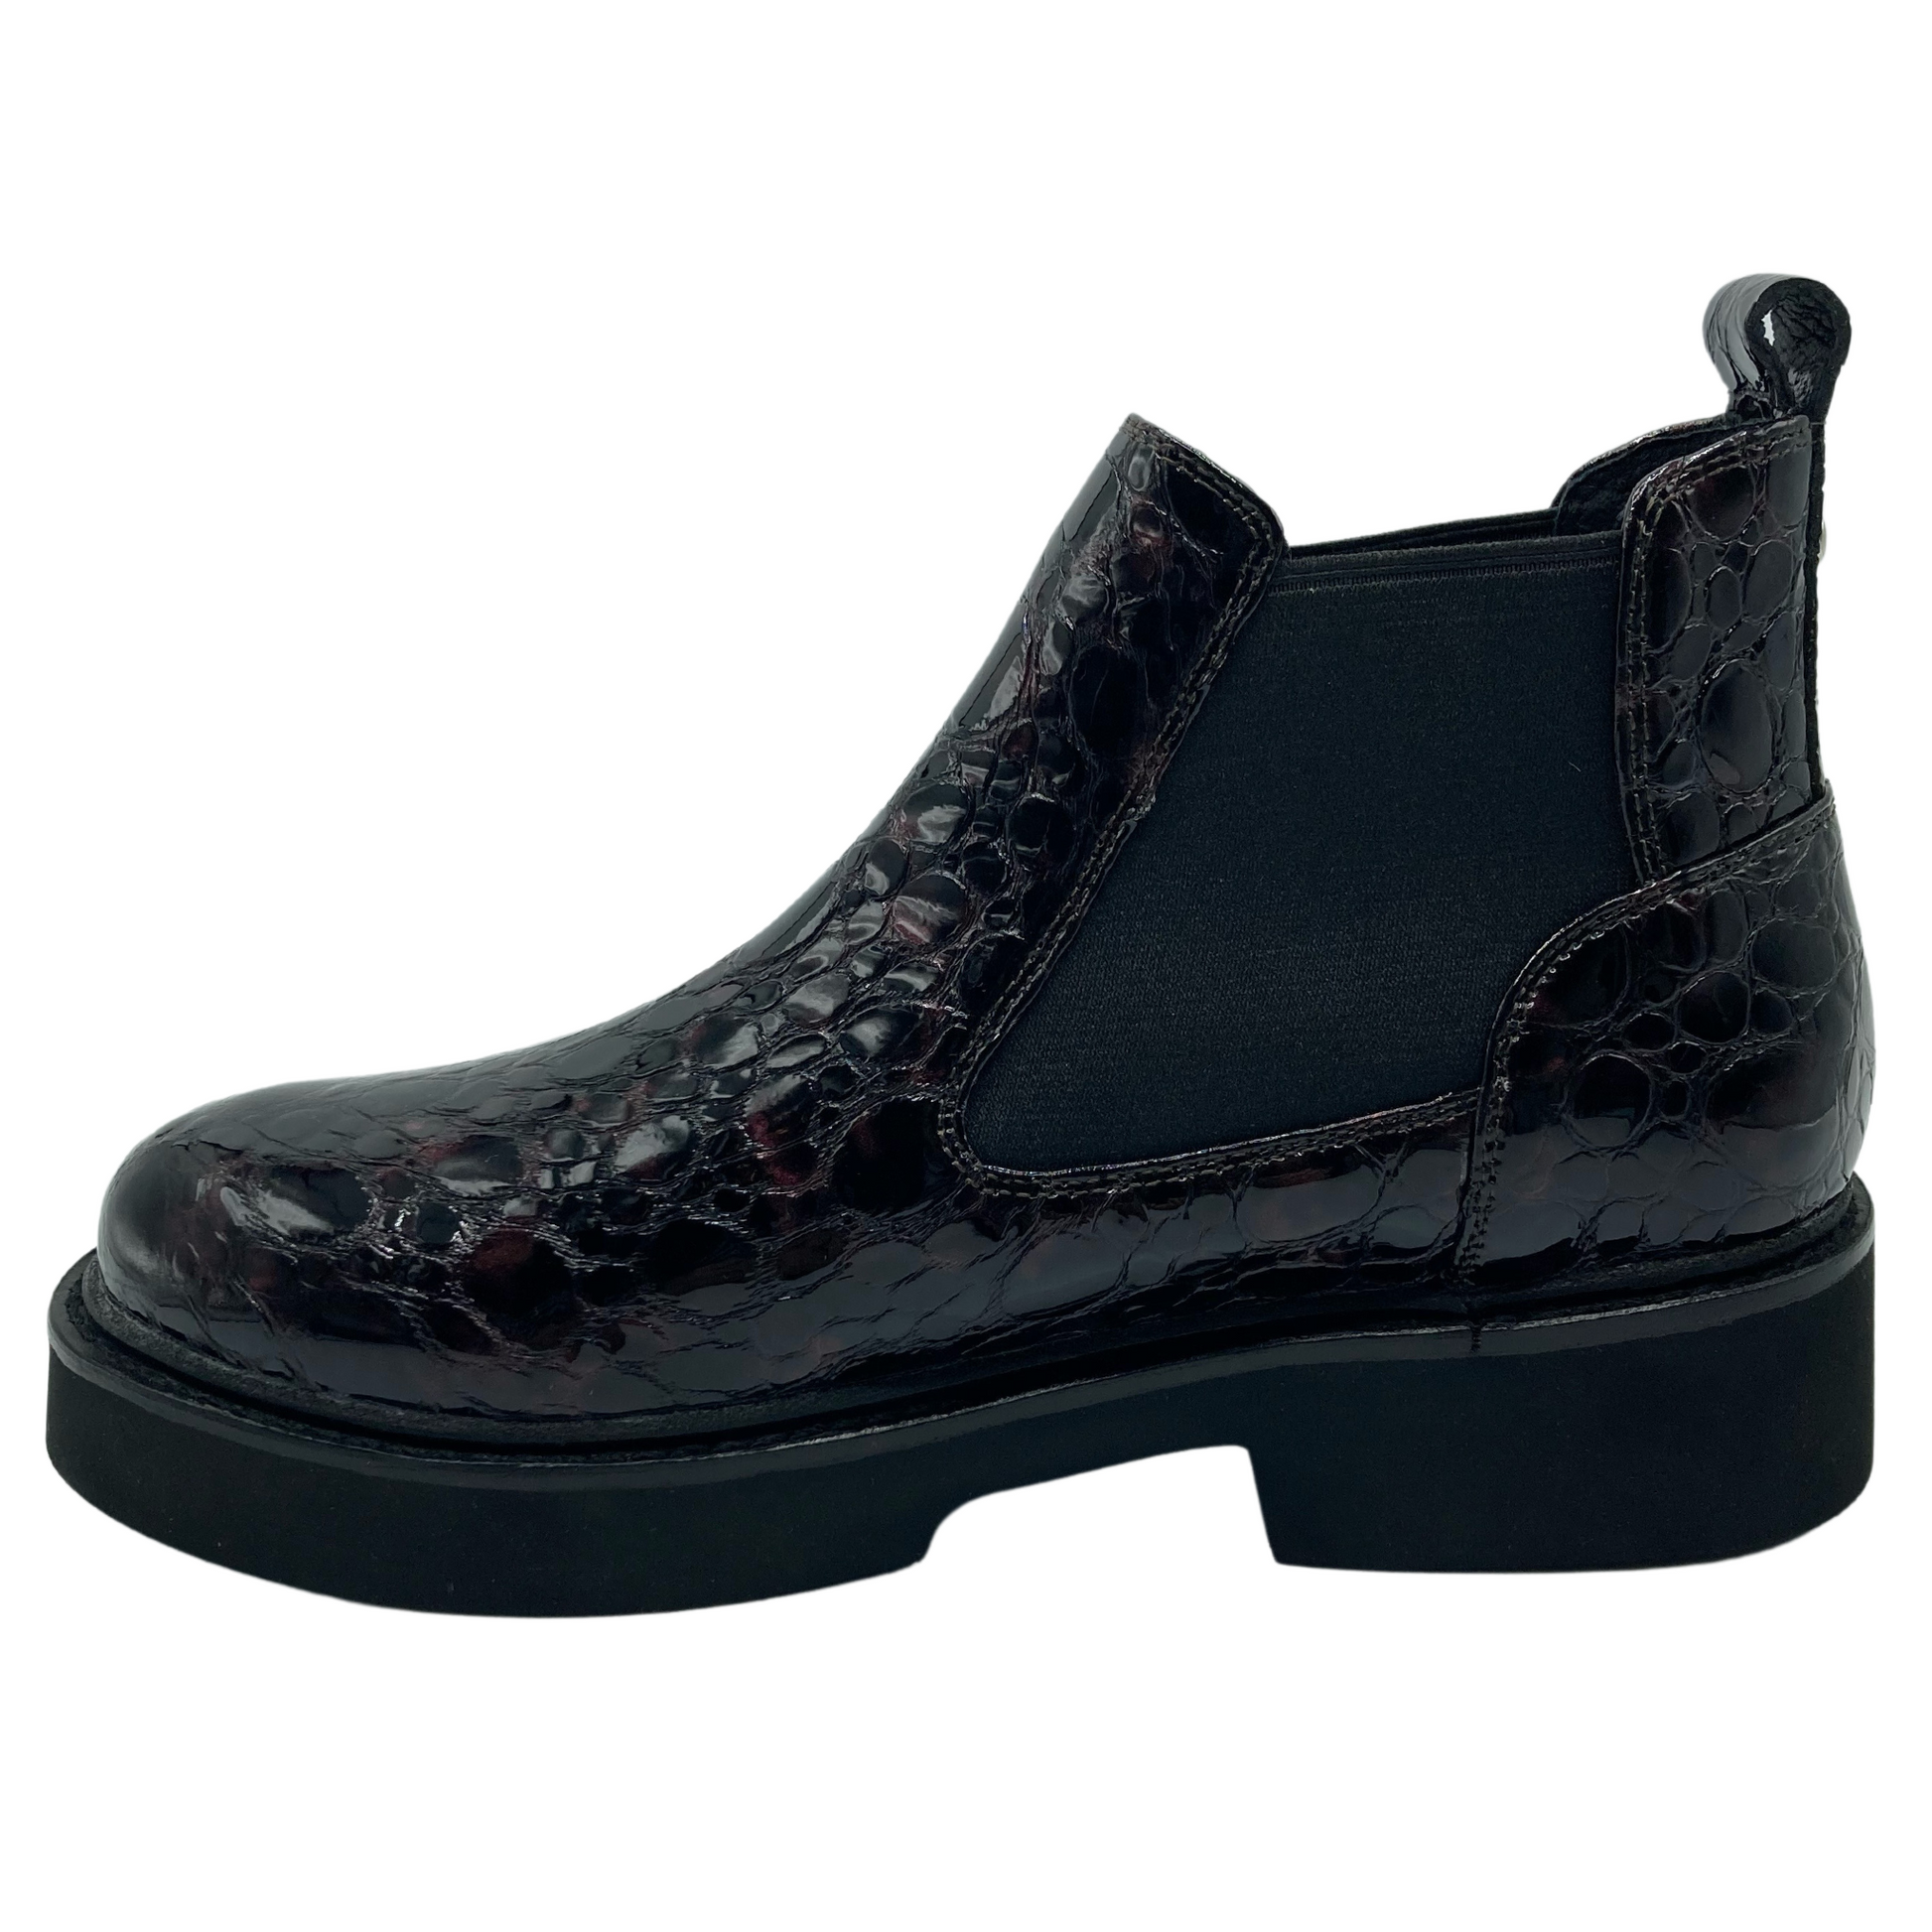 Left facing view of textured leather ankle boot with black rubber outsole and elastic double gore